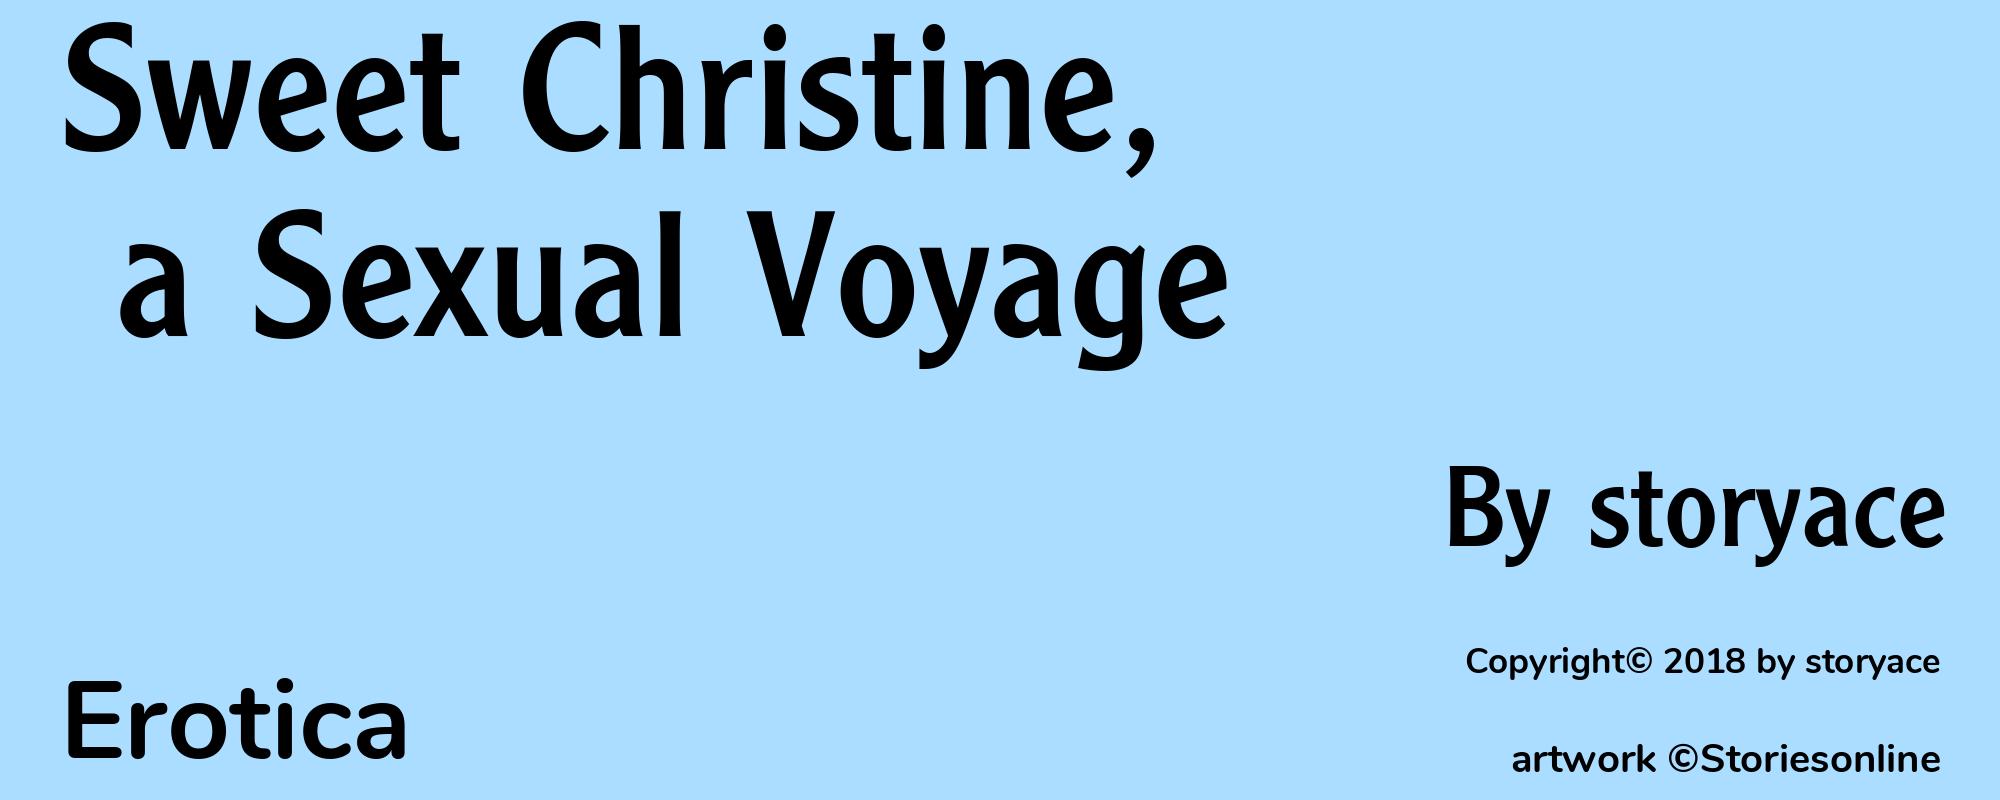 Sweet Christine, a Sexual Voyage - Cover